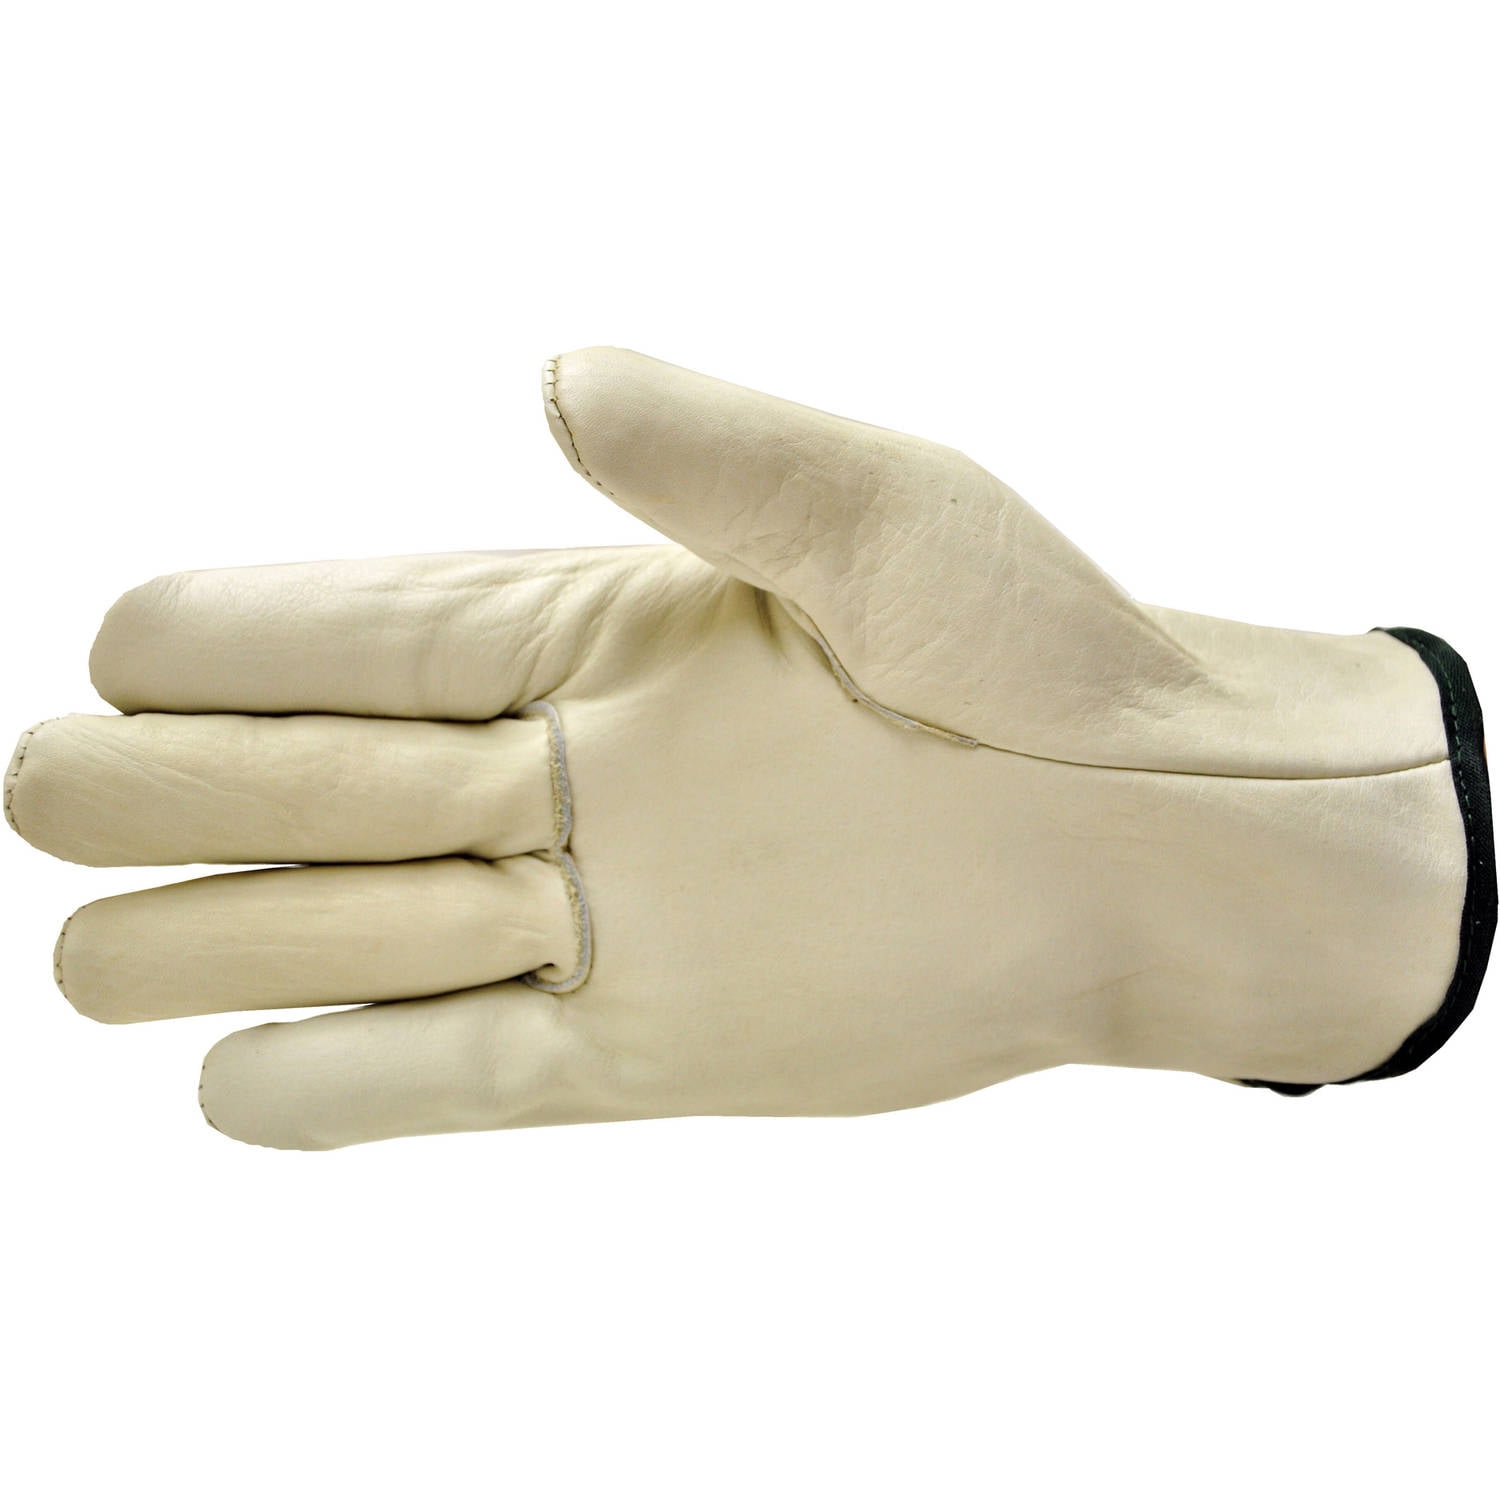 Pack of 1 Pair Boss 4067 Grain Leather Driver Work Gloves 2X-Large 